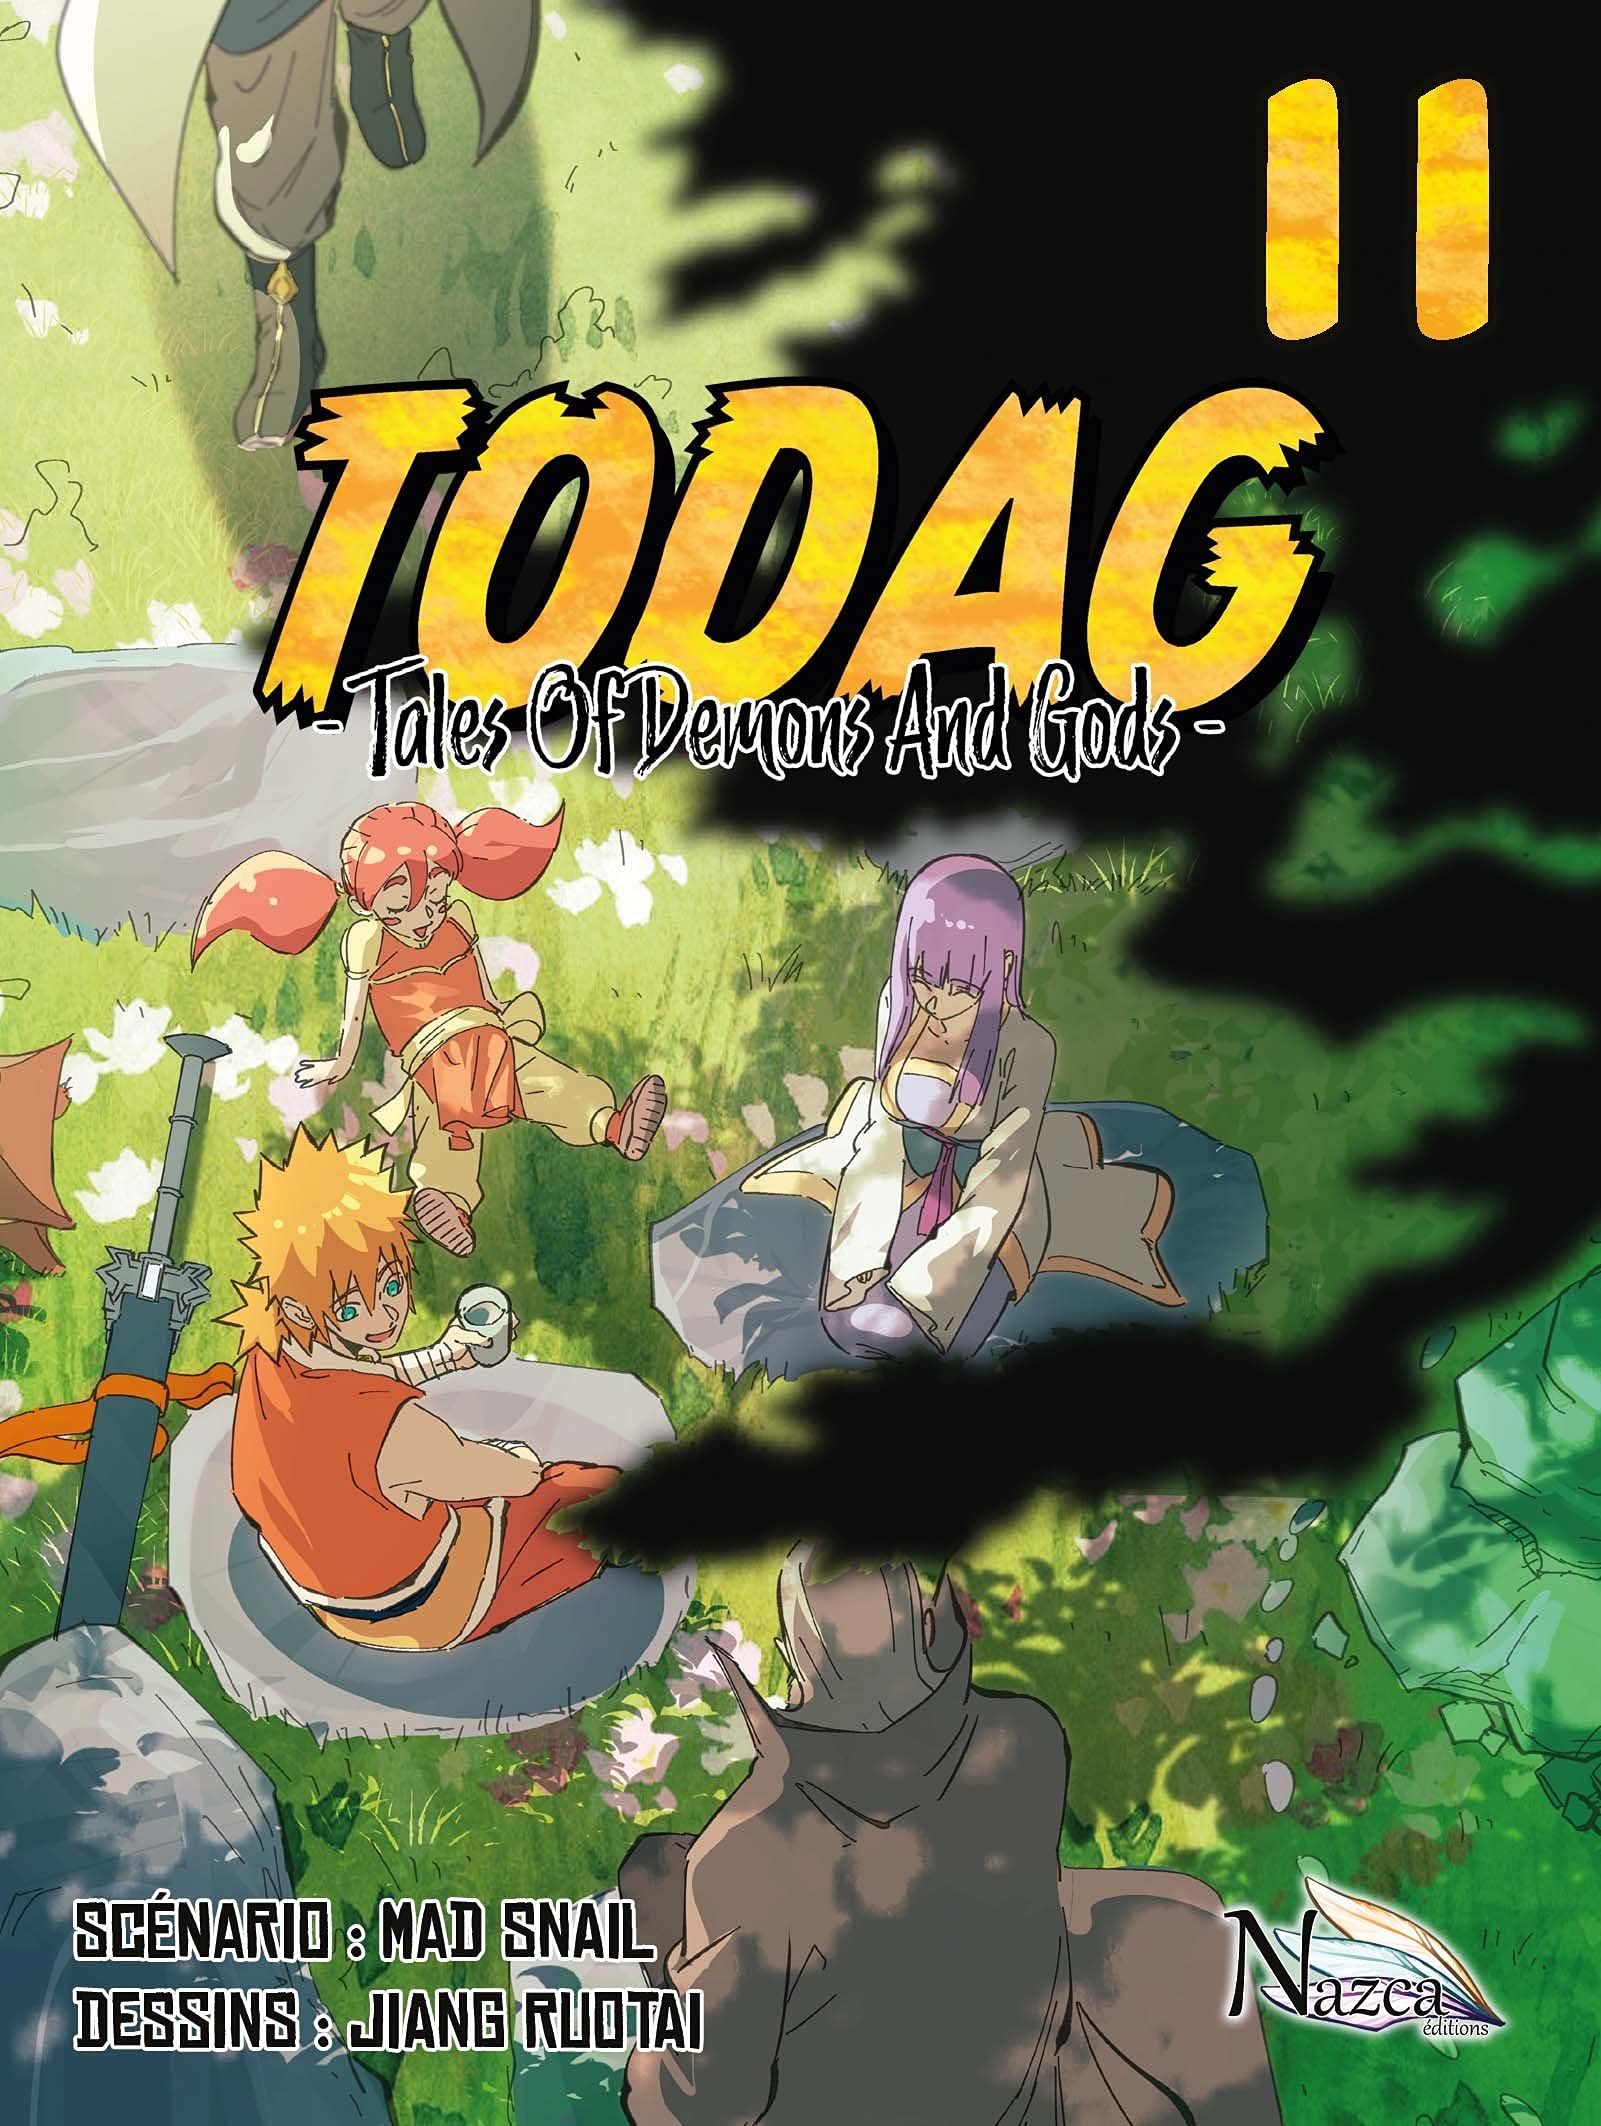 TODAG - Tales of Demons and Gods Vol.11